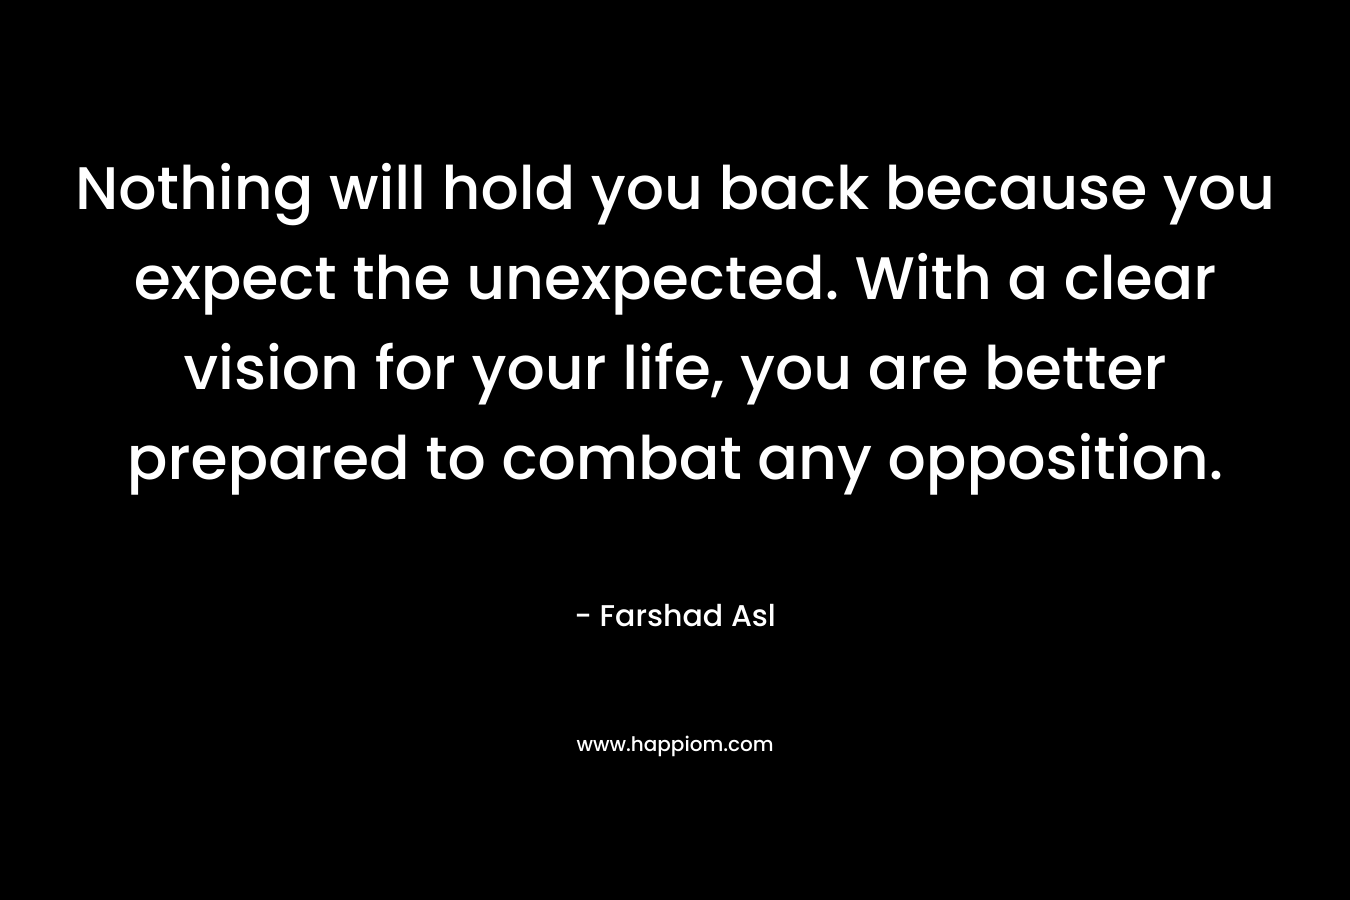 Nothing will hold you back because you expect the unexpected. With a clear vision for your life, you are better prepared to combat any opposition. – Farshad Asl